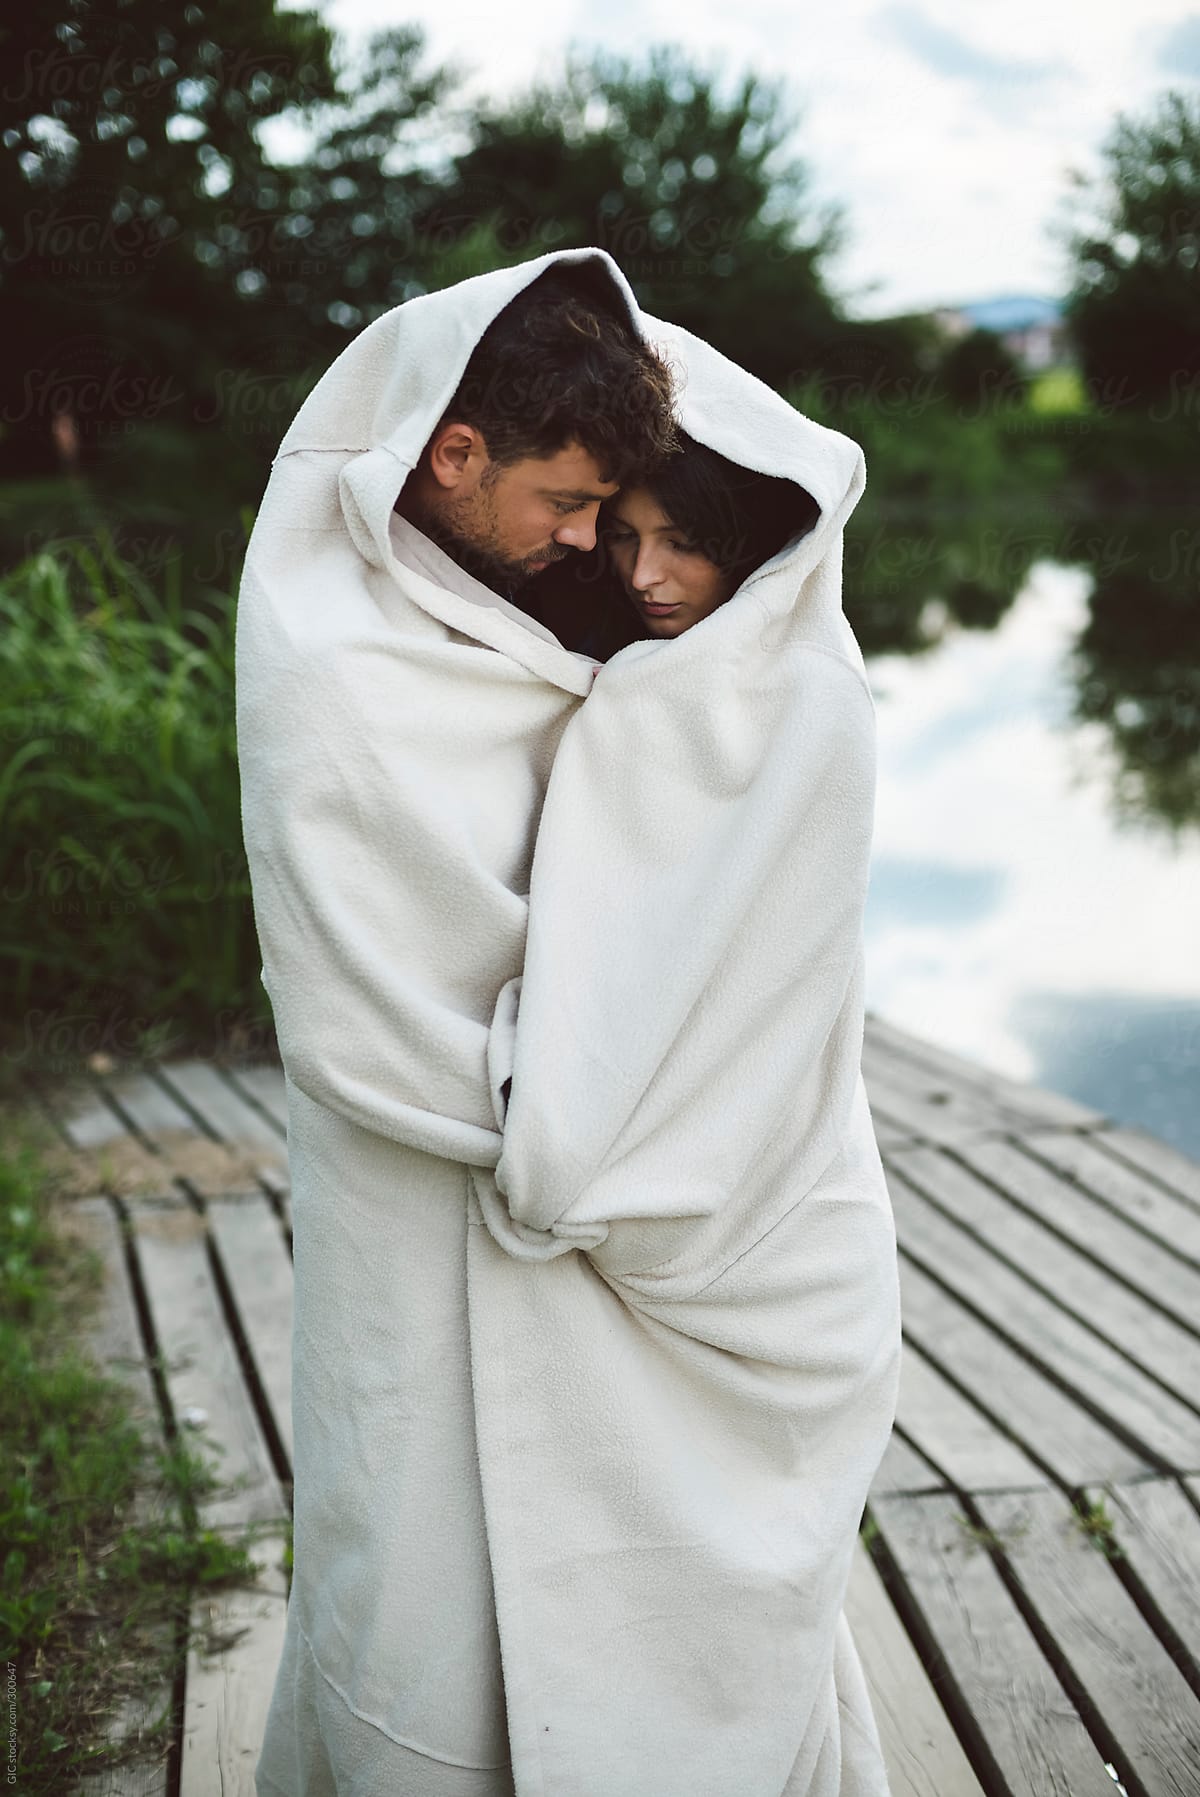 Couple Wrapped In Blanket Outdoors By Stocksy Contributor Simone Wave Stocksy